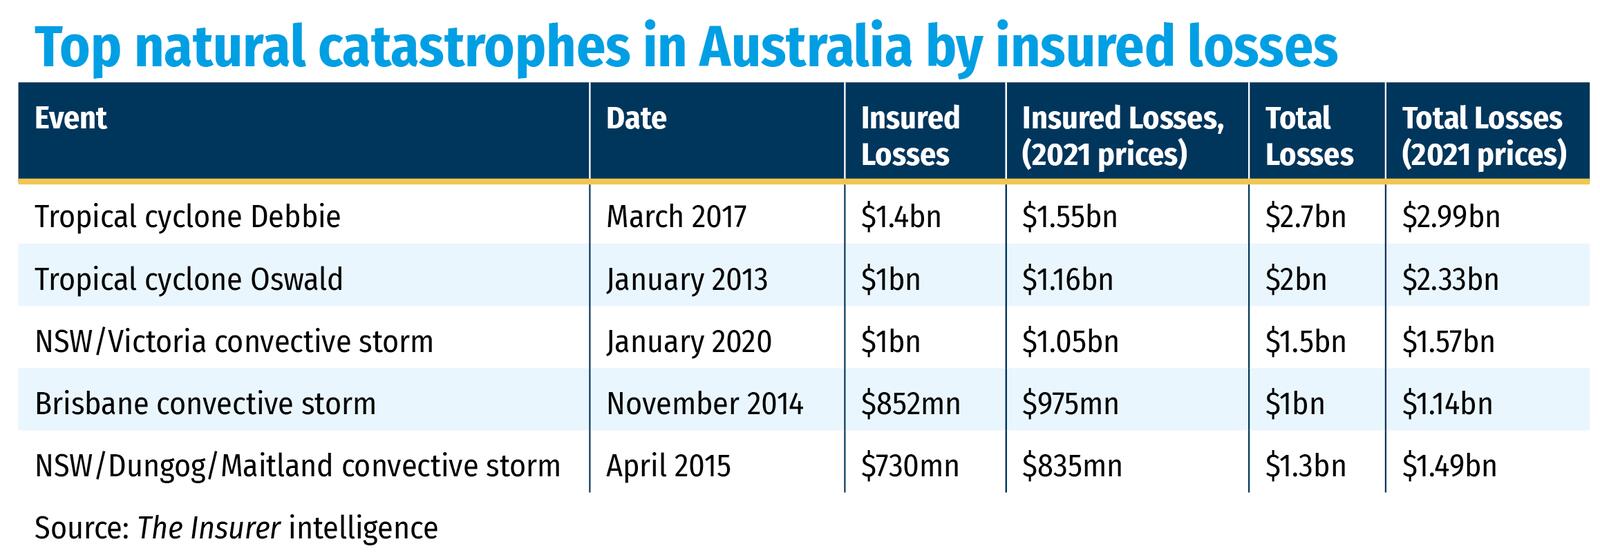 Top natural catastrophes in Australia by insured losses